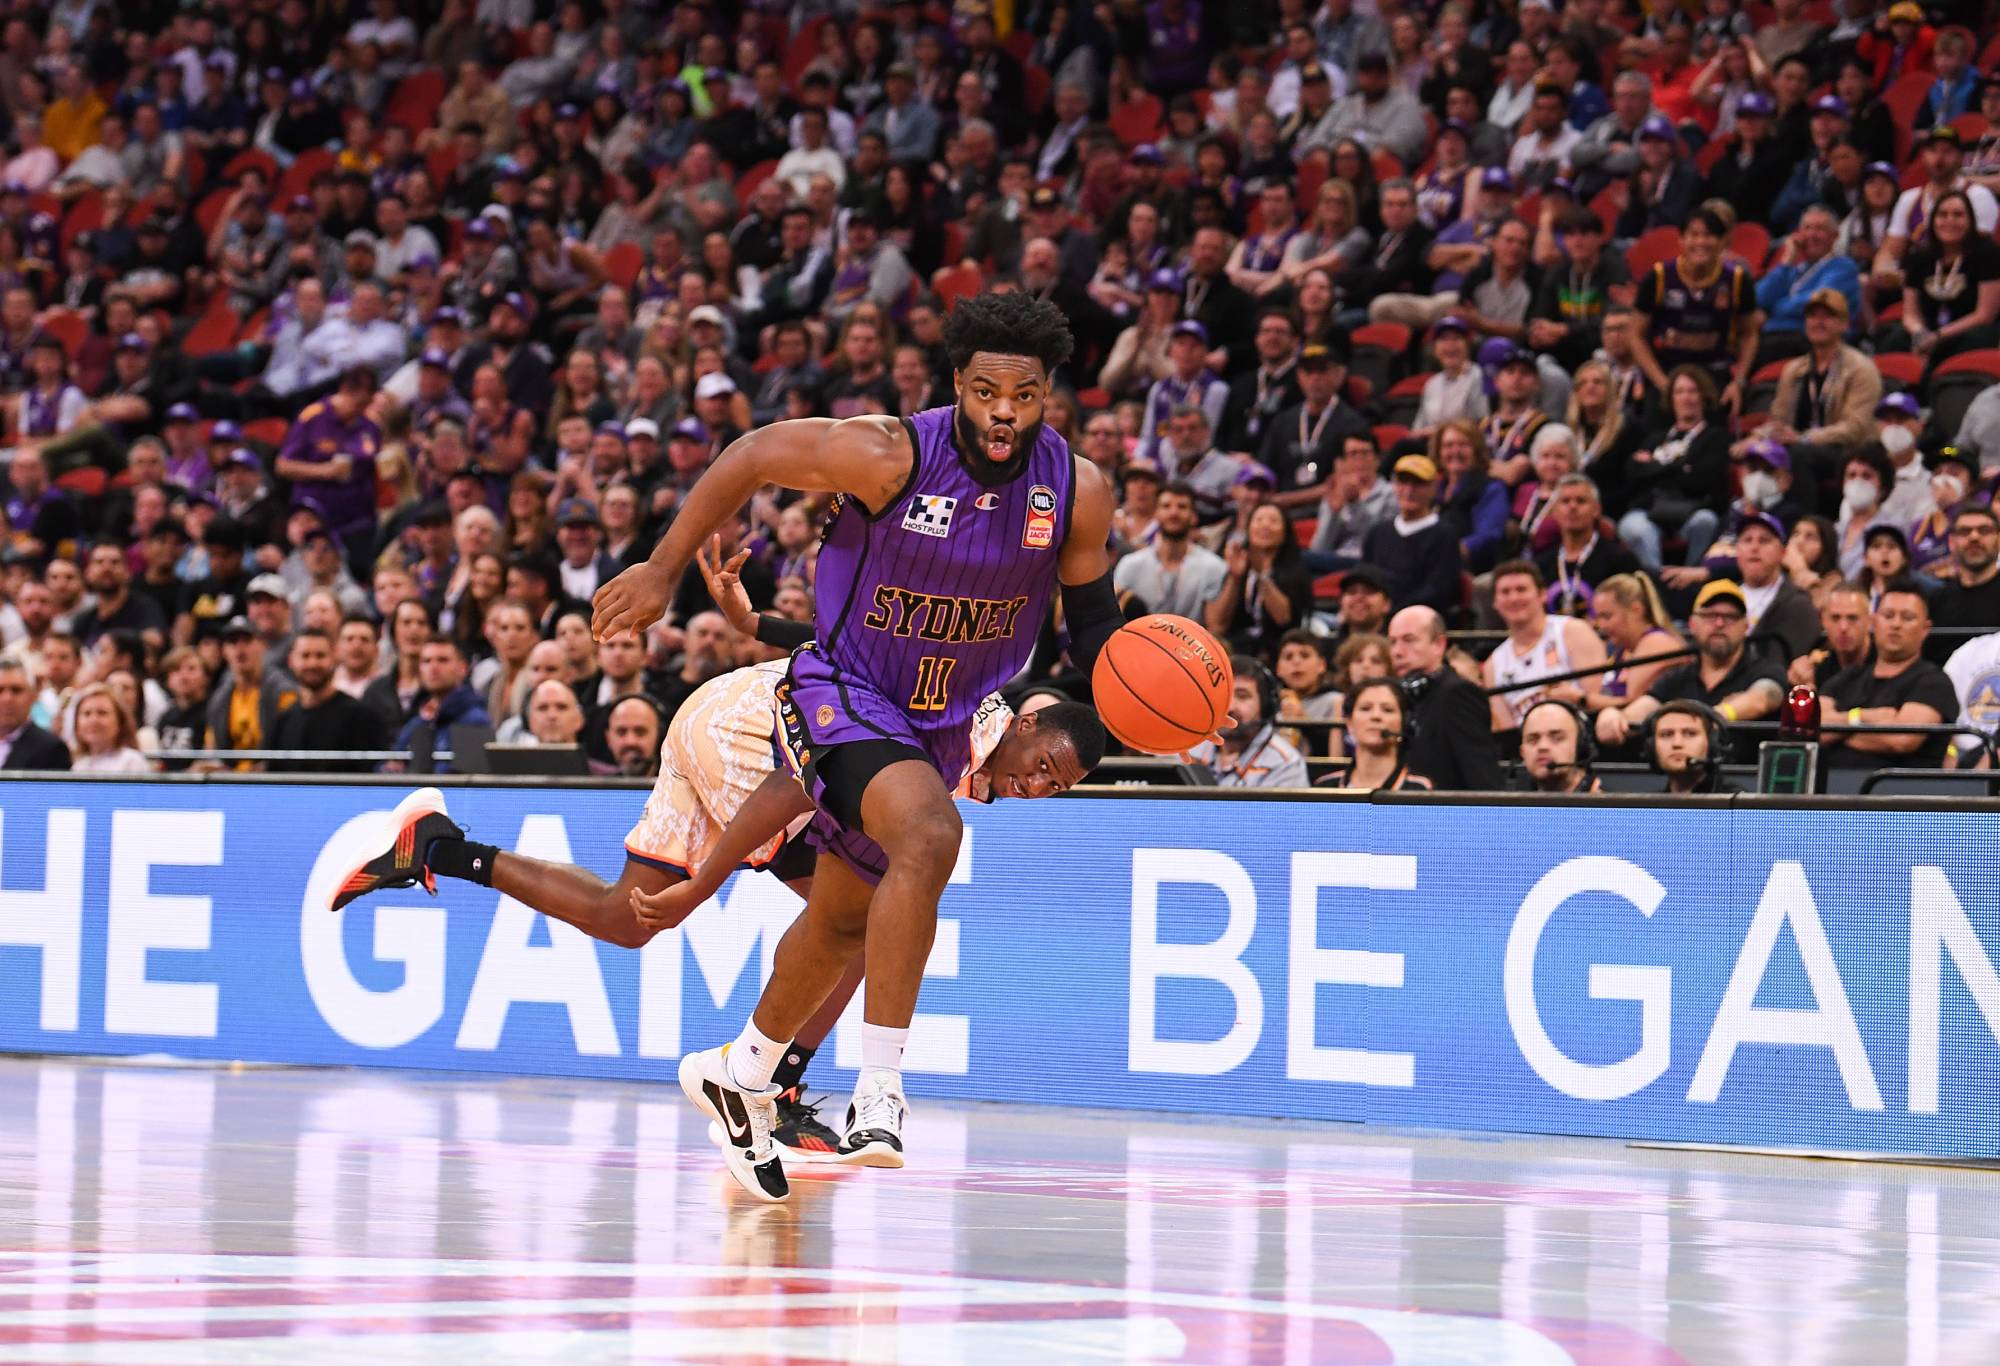 SYDNEY, AUSTRALIA - OCTOBER 14: Derrick Walton dribbles past a defender during the round three NBL match between Sydney Kings and Cairns Taipans at Qudos Bank Arena, on October 14, 2022, in Sydney, Australia. (Photo by Nathan Hopkins/Getty Images)